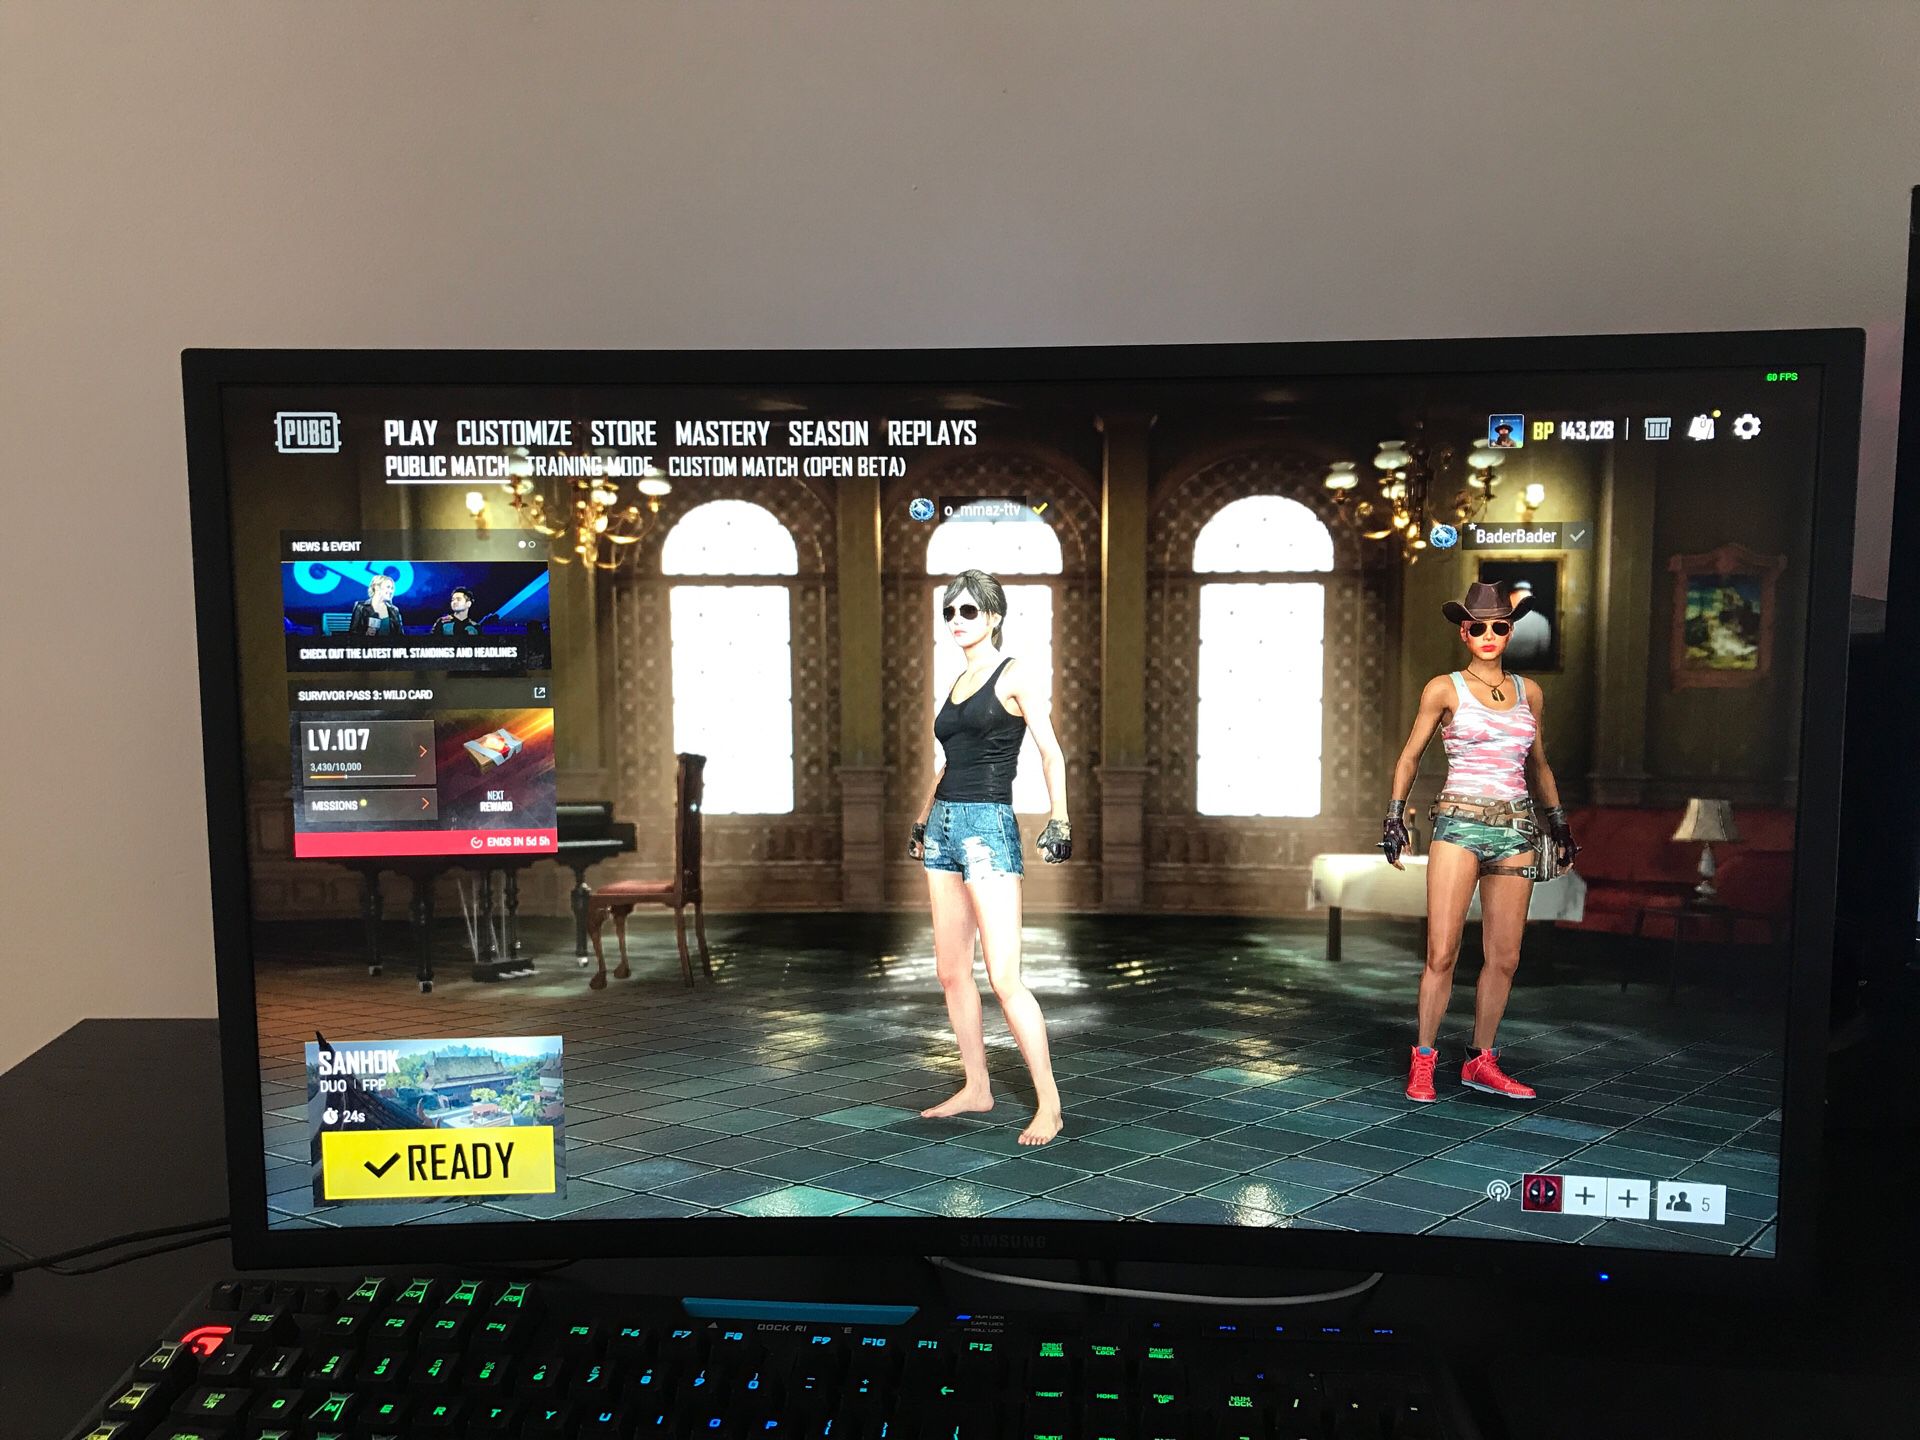 Chg27 samsung 27’ 144hz 1ms response time. HDR for playstation and xbox